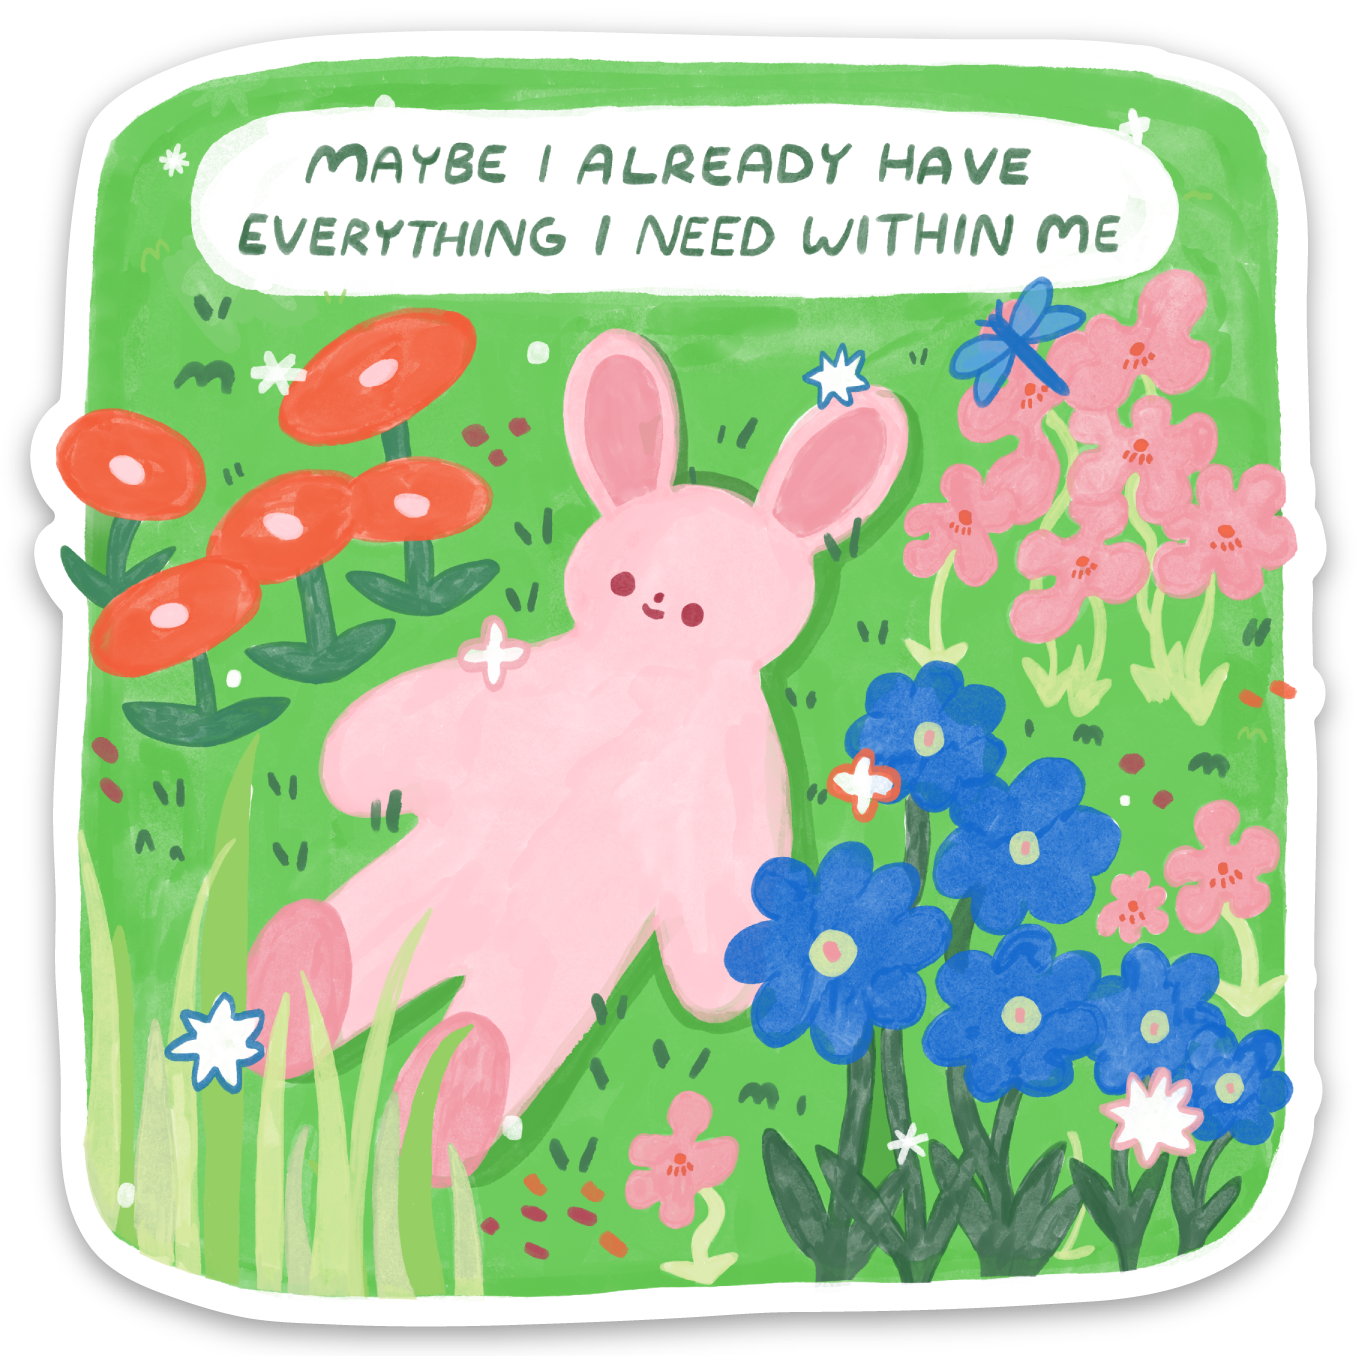 Everything Pink Stickers